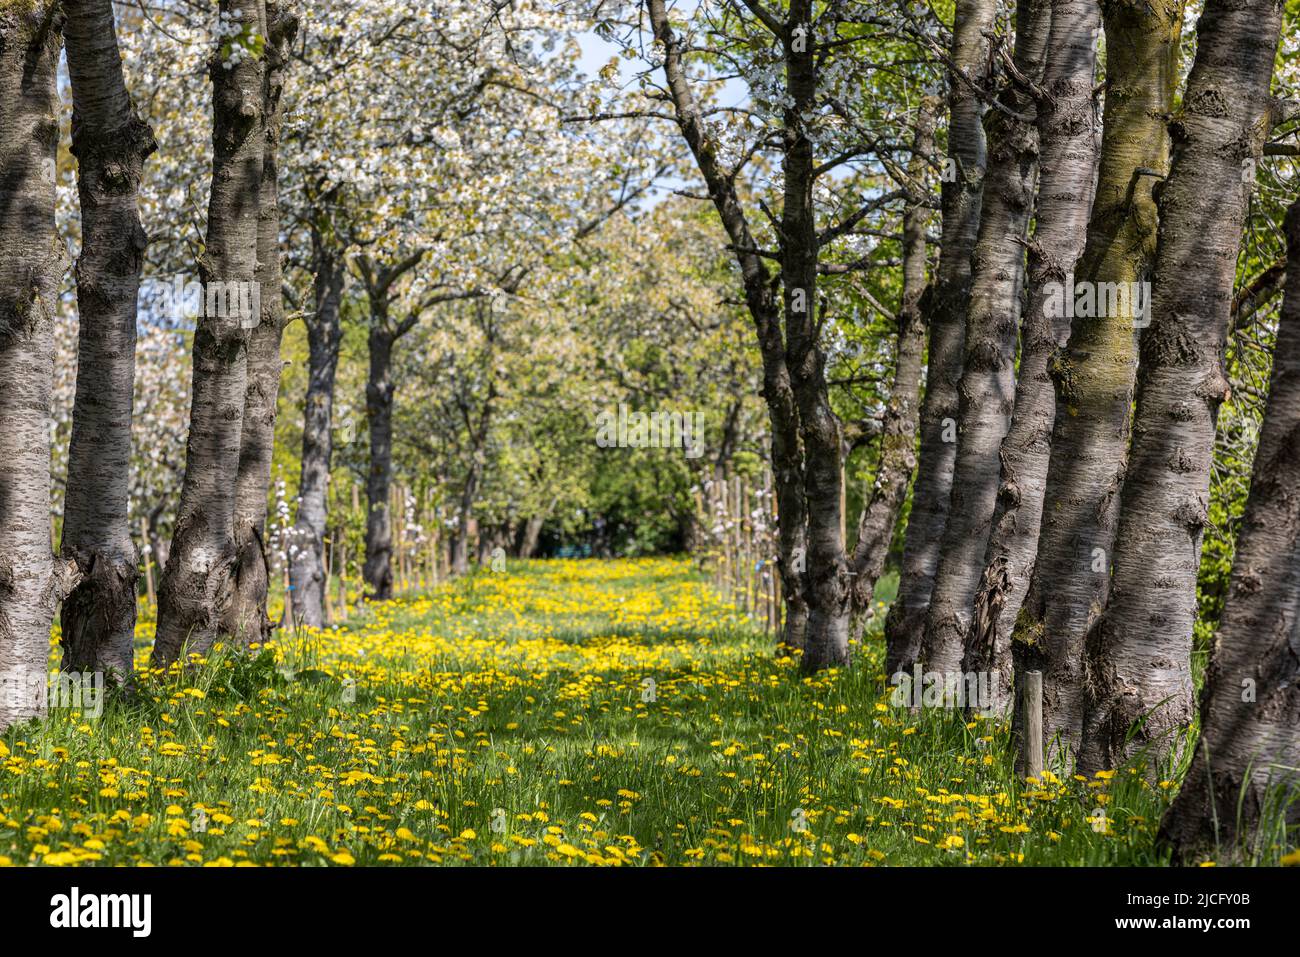 An apple tree avenue near Jork in the Alte Land at apple blossom and lots of flowering dandelions Stock Photo